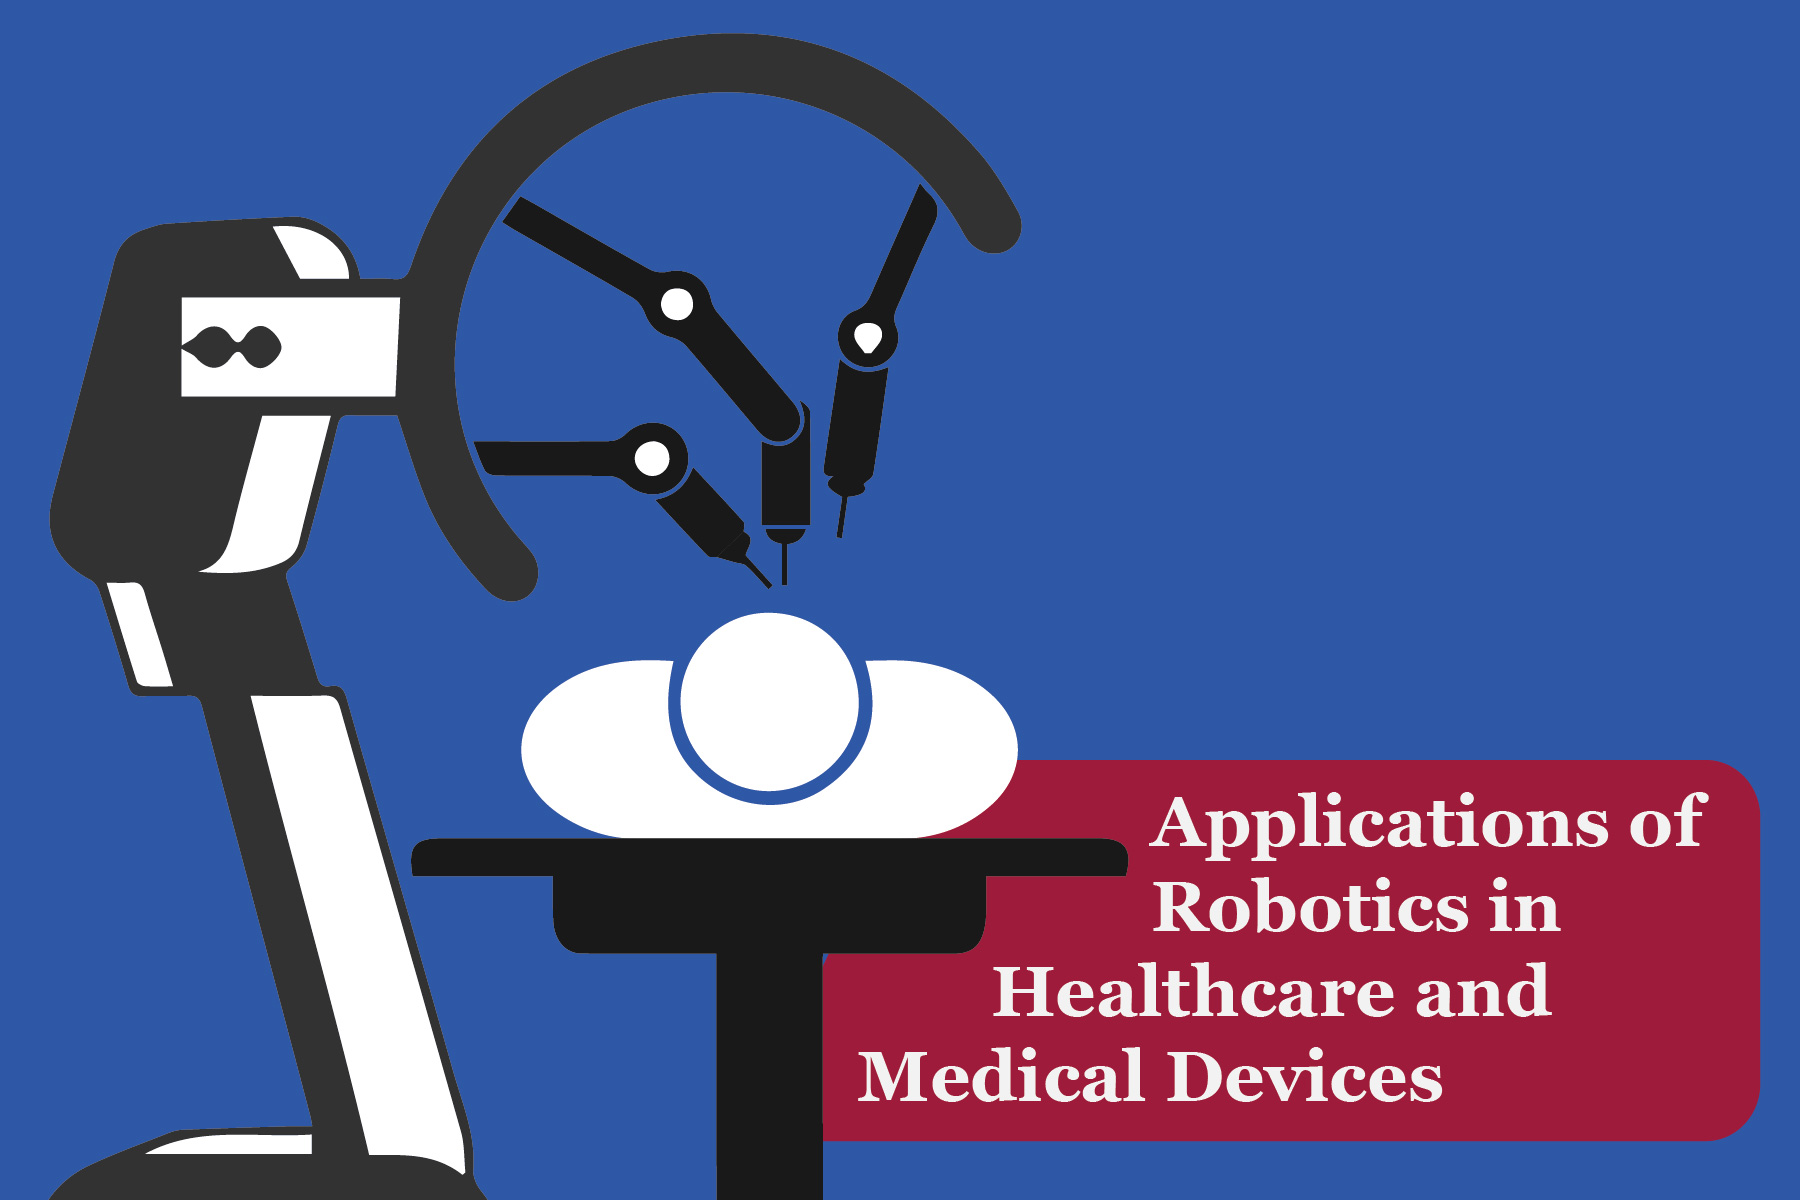 Applications of Robotics in Healthcare and Medical Devices